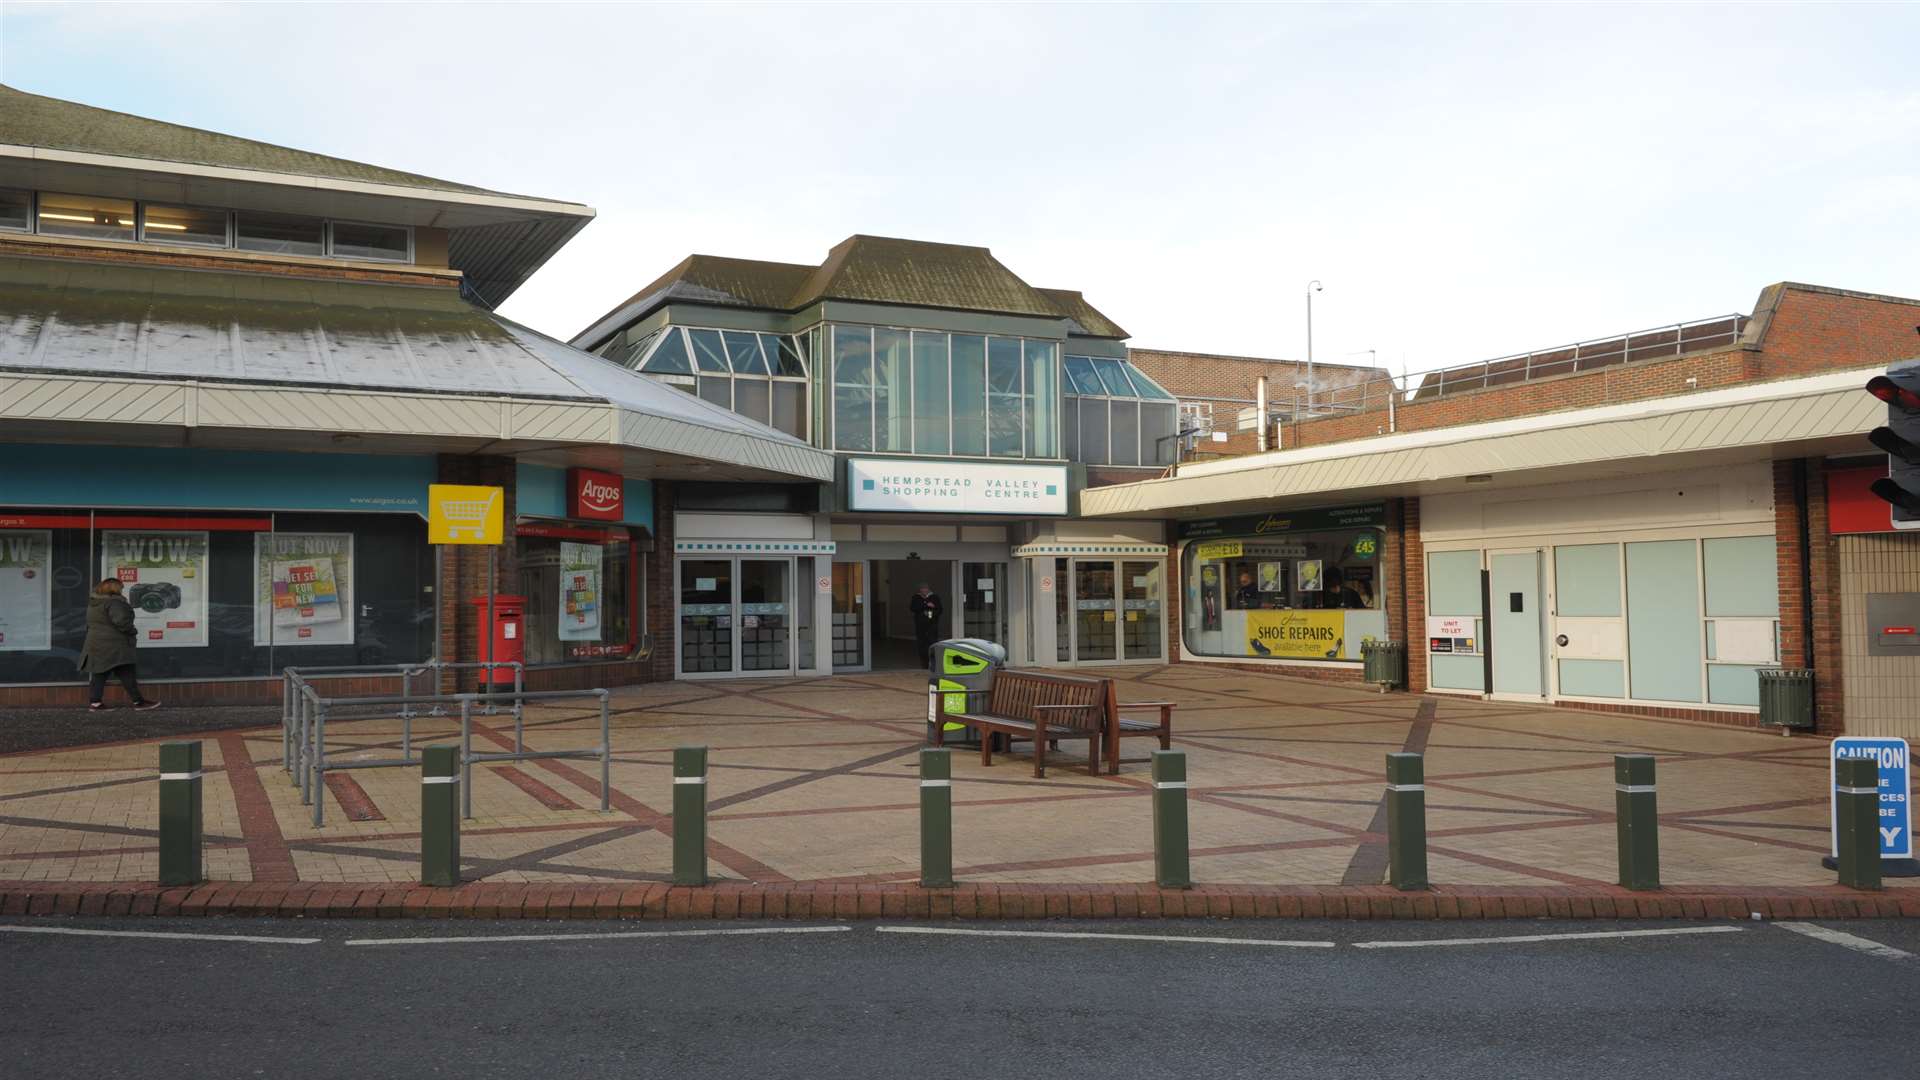 Hempstead Valley Shopping Centre has been closed early.